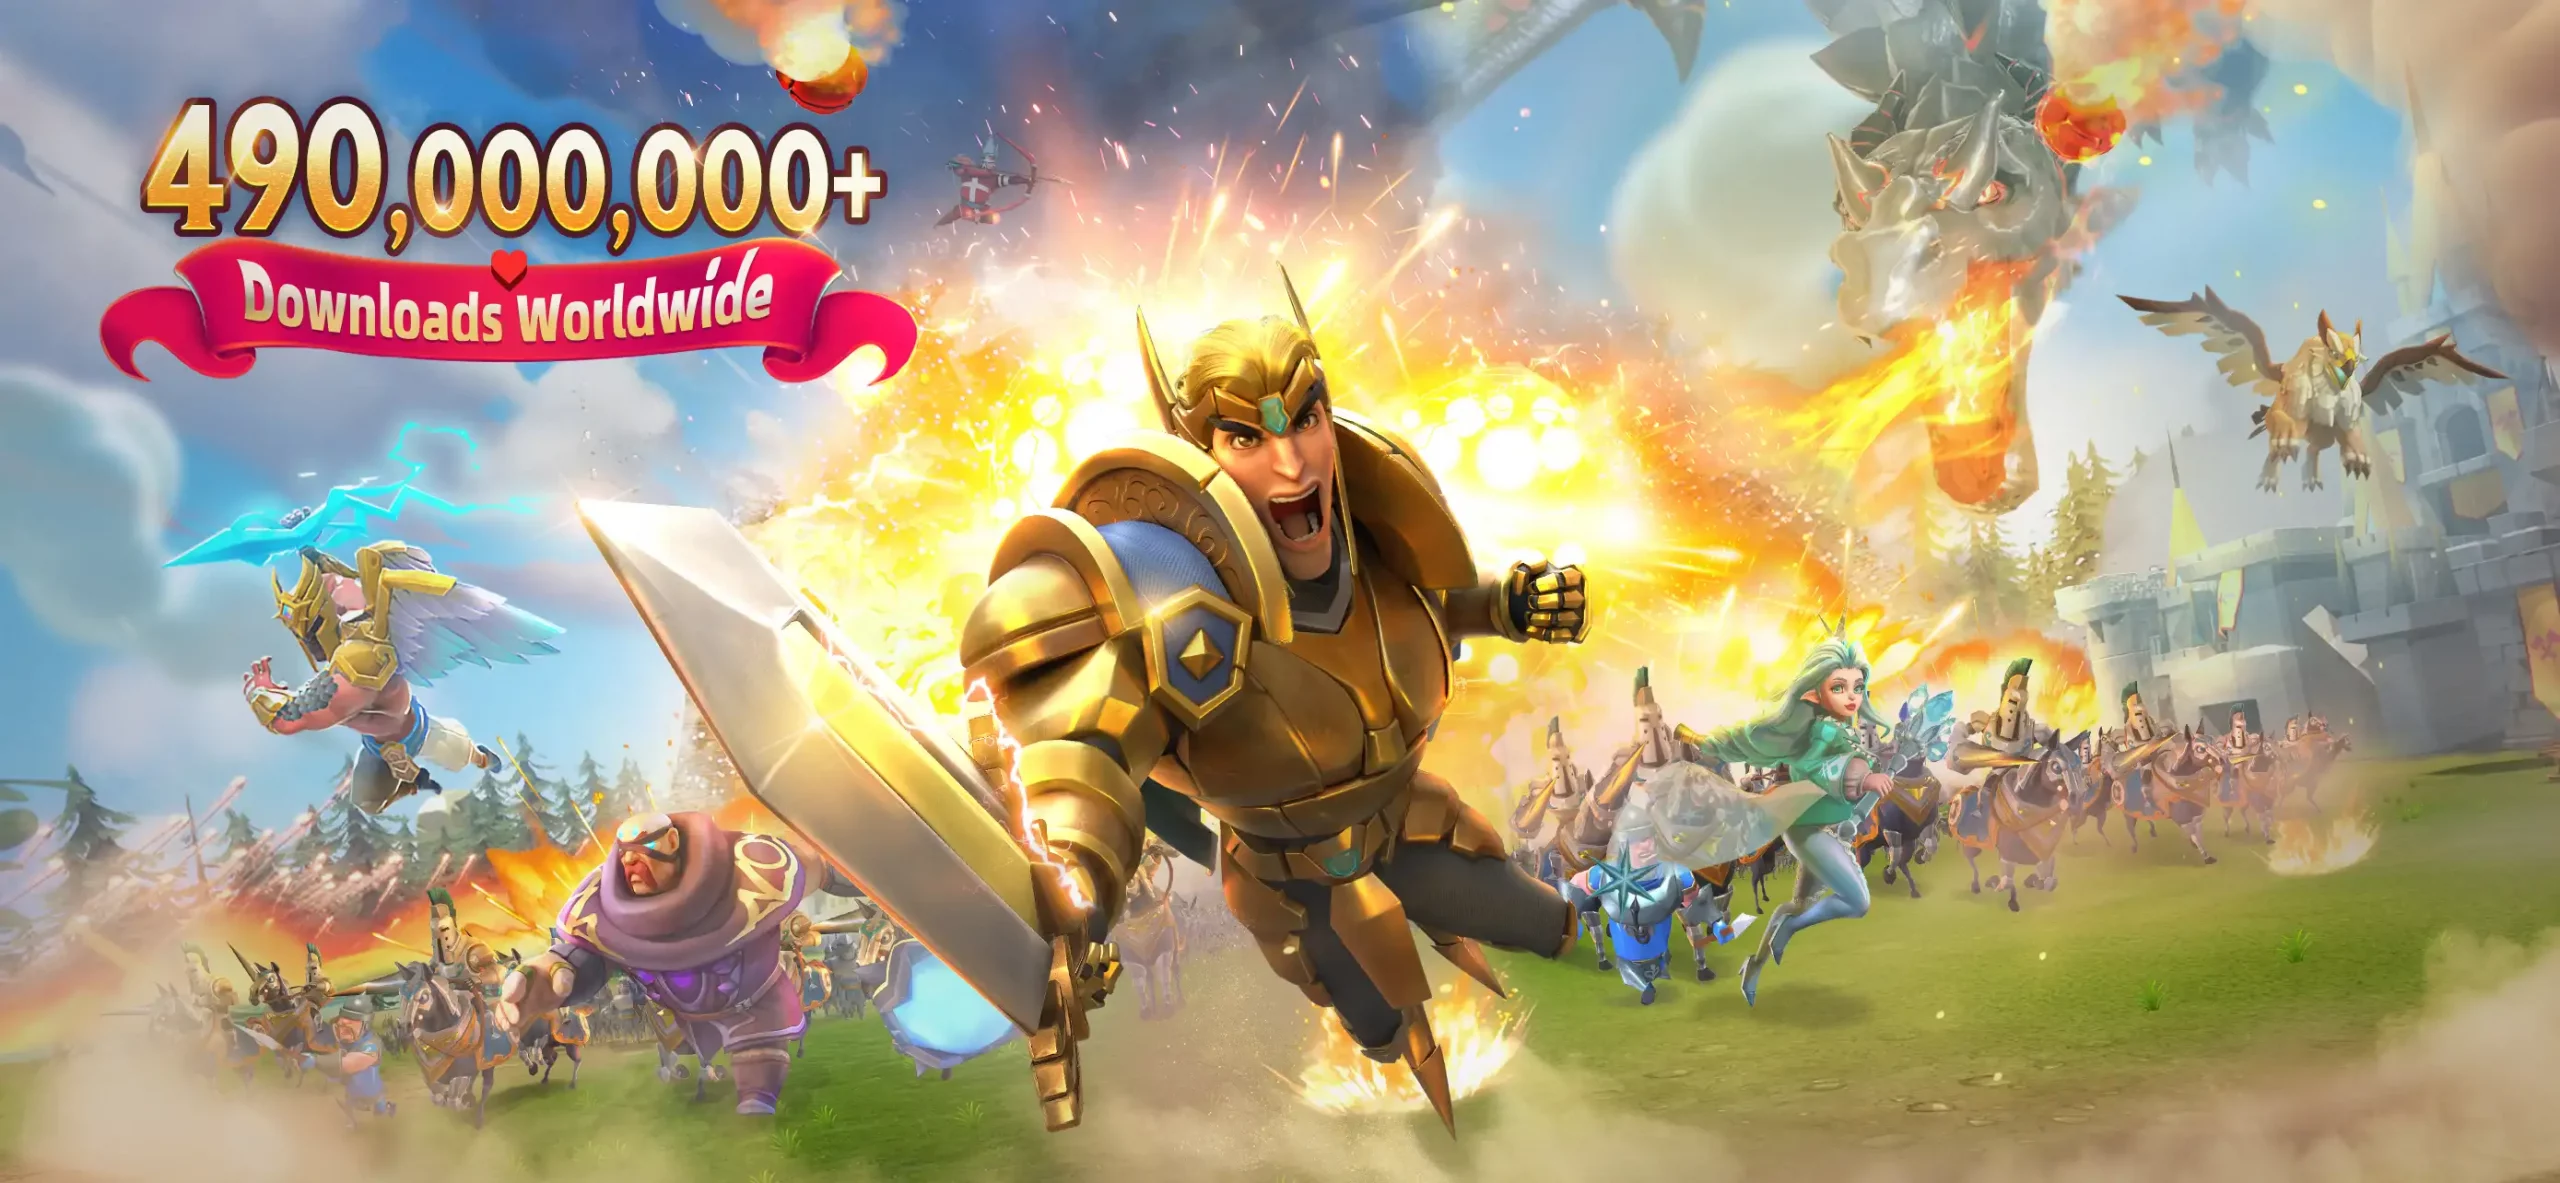 What Is Lords Mobile Mod APK?